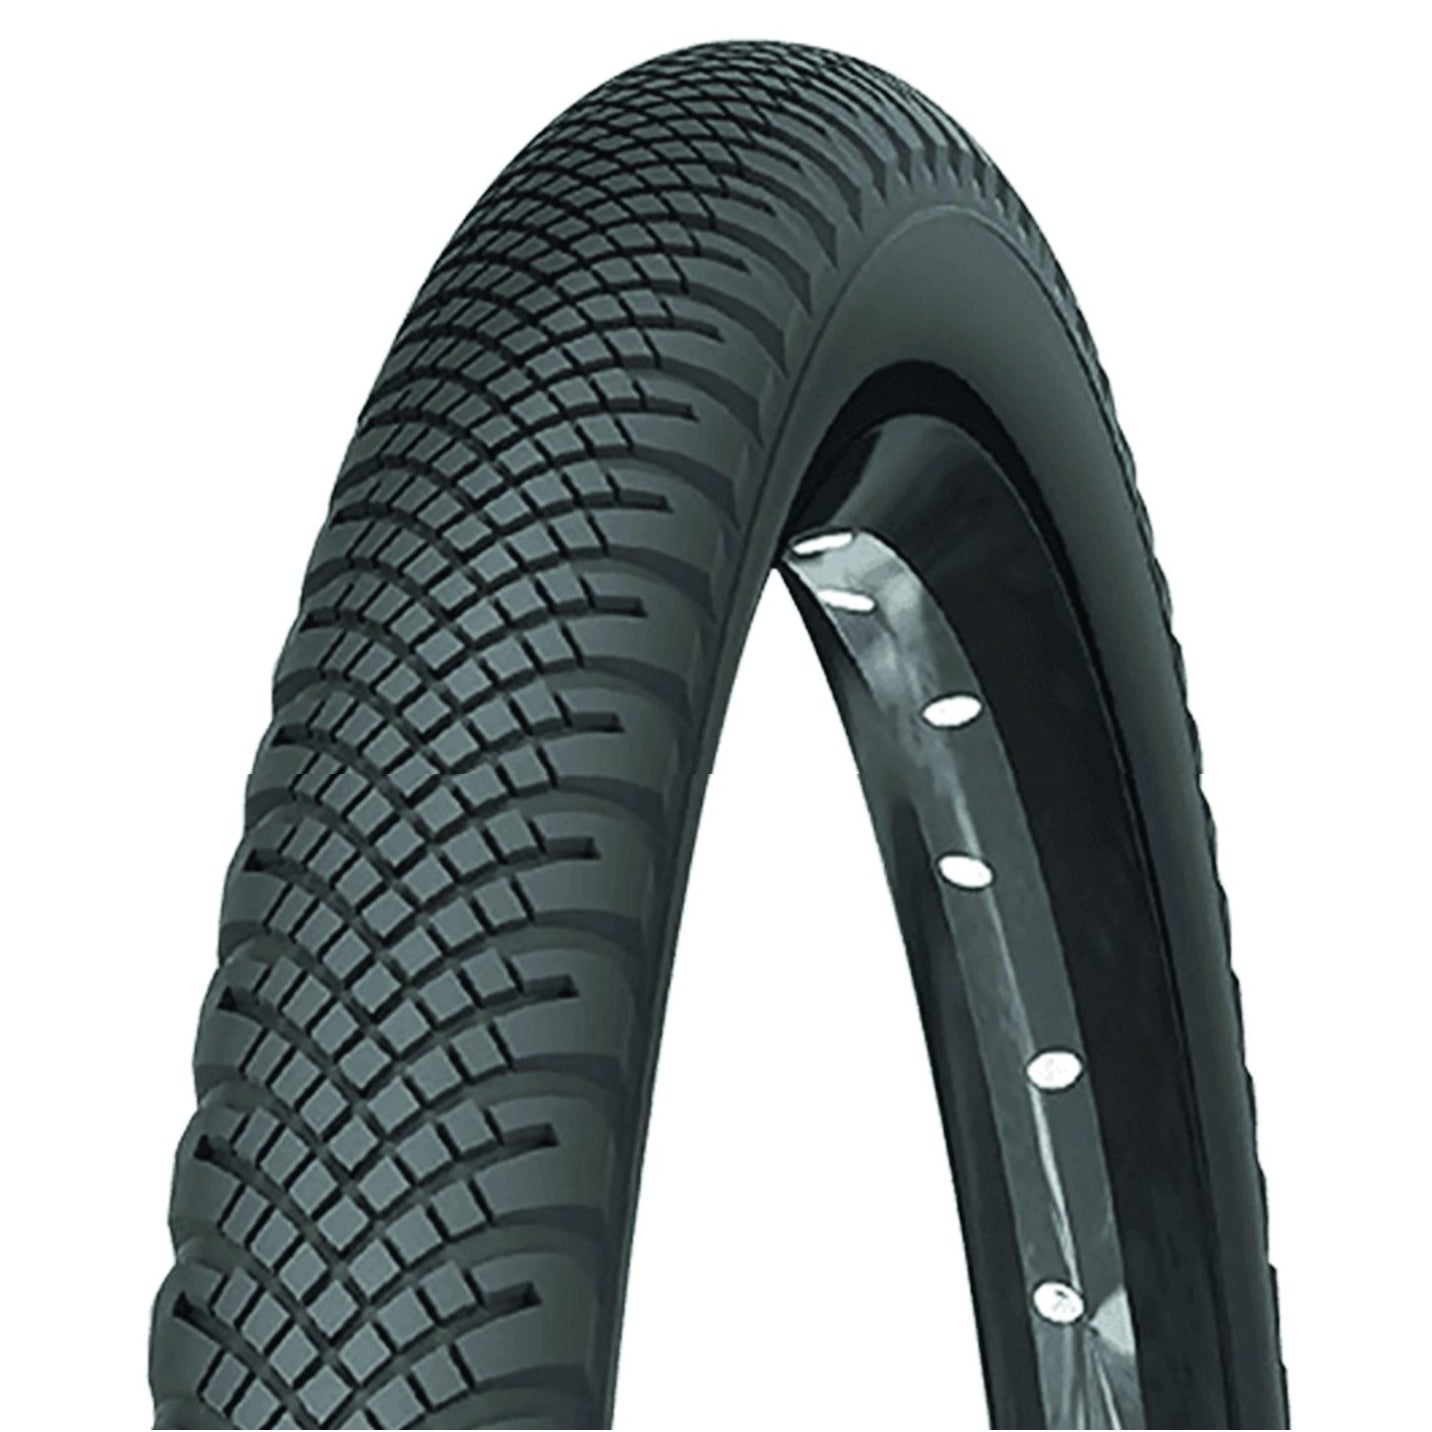 Michelin Country Rock 26x1.75 Tire - The Bikesmiths